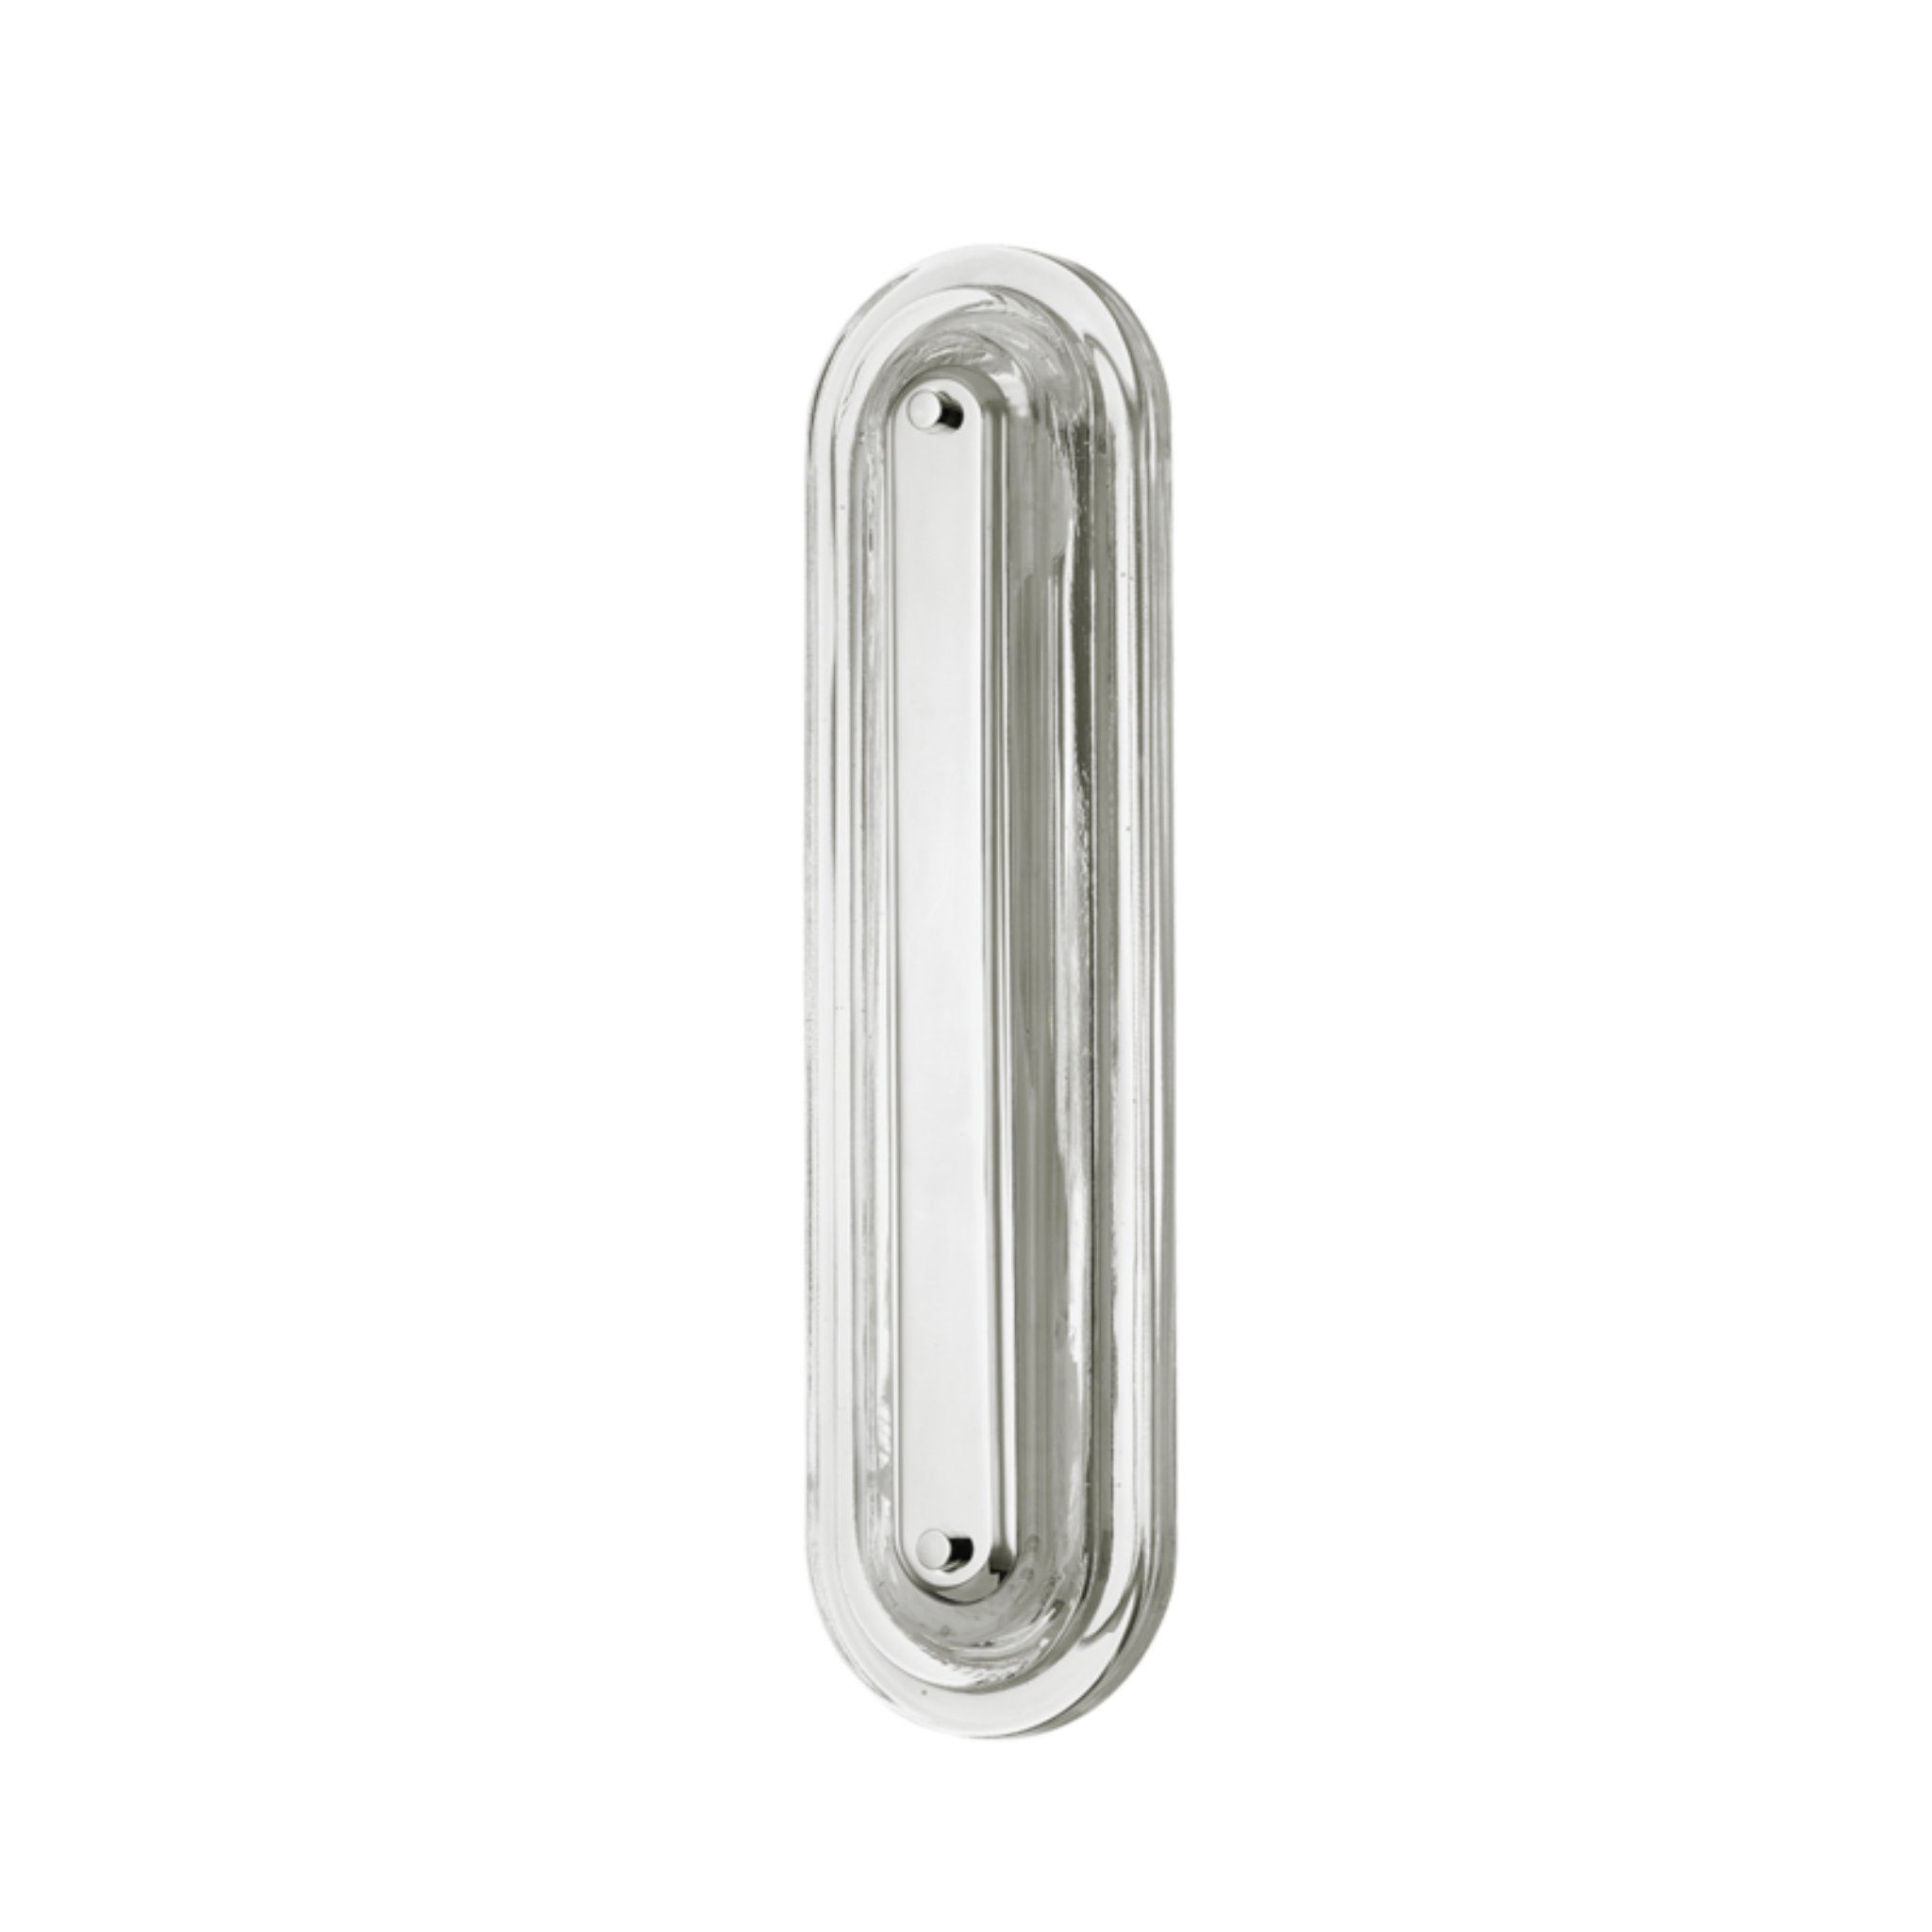 Litton 1 Light Wall Sconce in Polished Nickel by Pembrooke & Ives